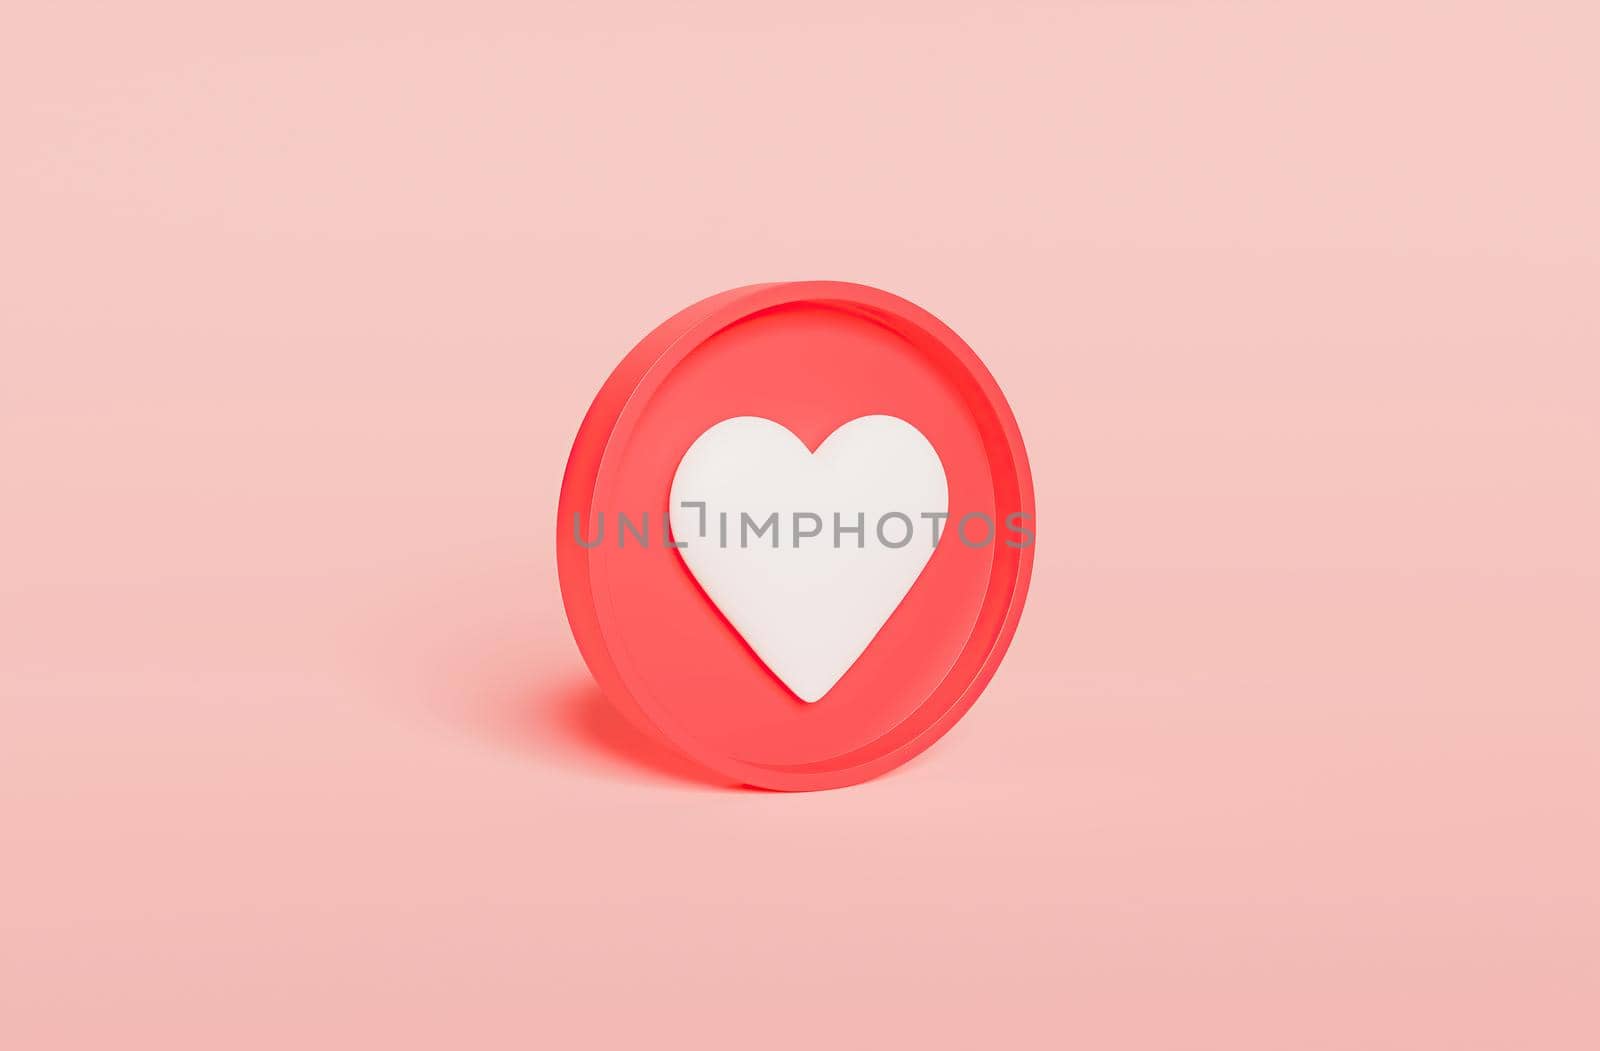 3d heart icon on red circle by asolano